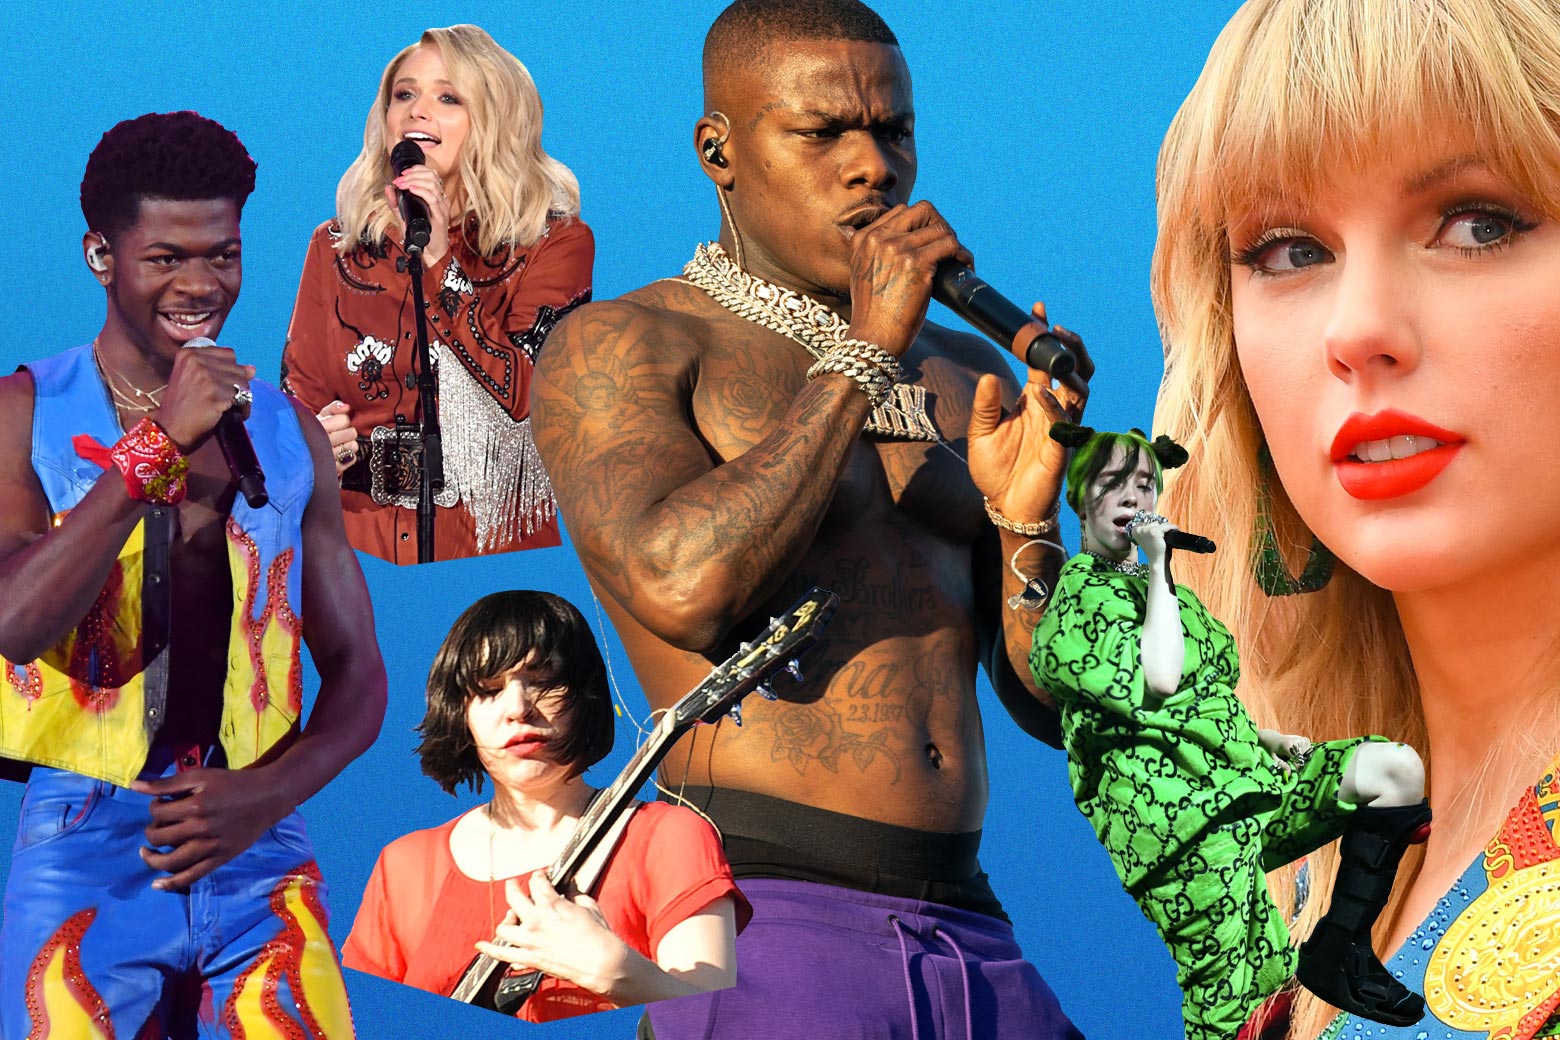 Photo collage of various entries, including Lil Nas X, Taylor Swift, and Carrie Brownstein of Sleater-Kinney.